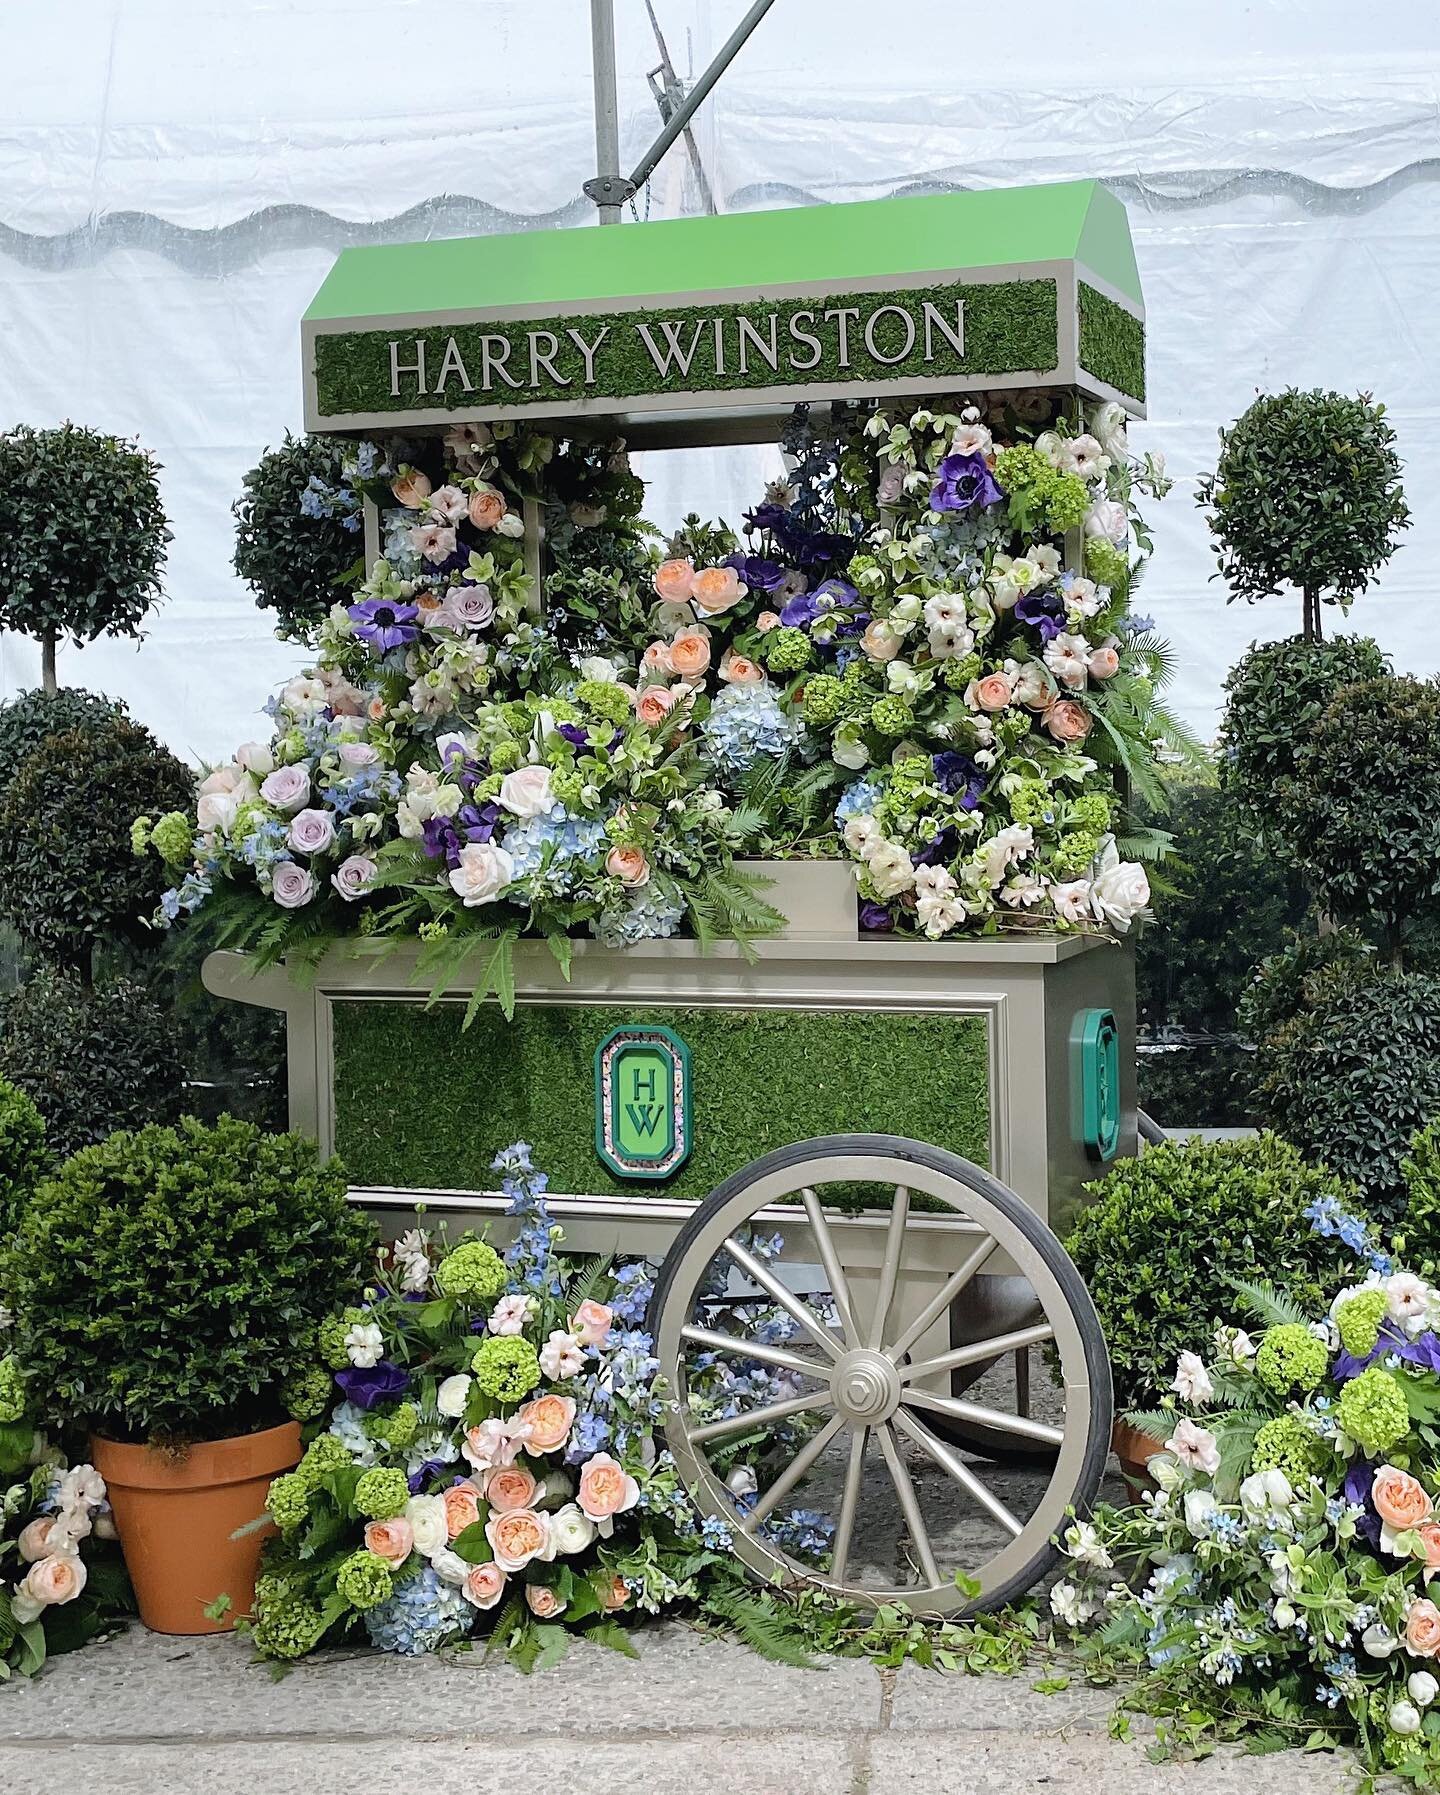 Spring has Sprung at the Hat Luncheon Benefit for the Central Park Conservancy. This flower cart for Harry Winston is a festive decor option for the Spring and Summer seasons. 🌸

Inquiries? Reach out through the link above. 

#marketing #experientia